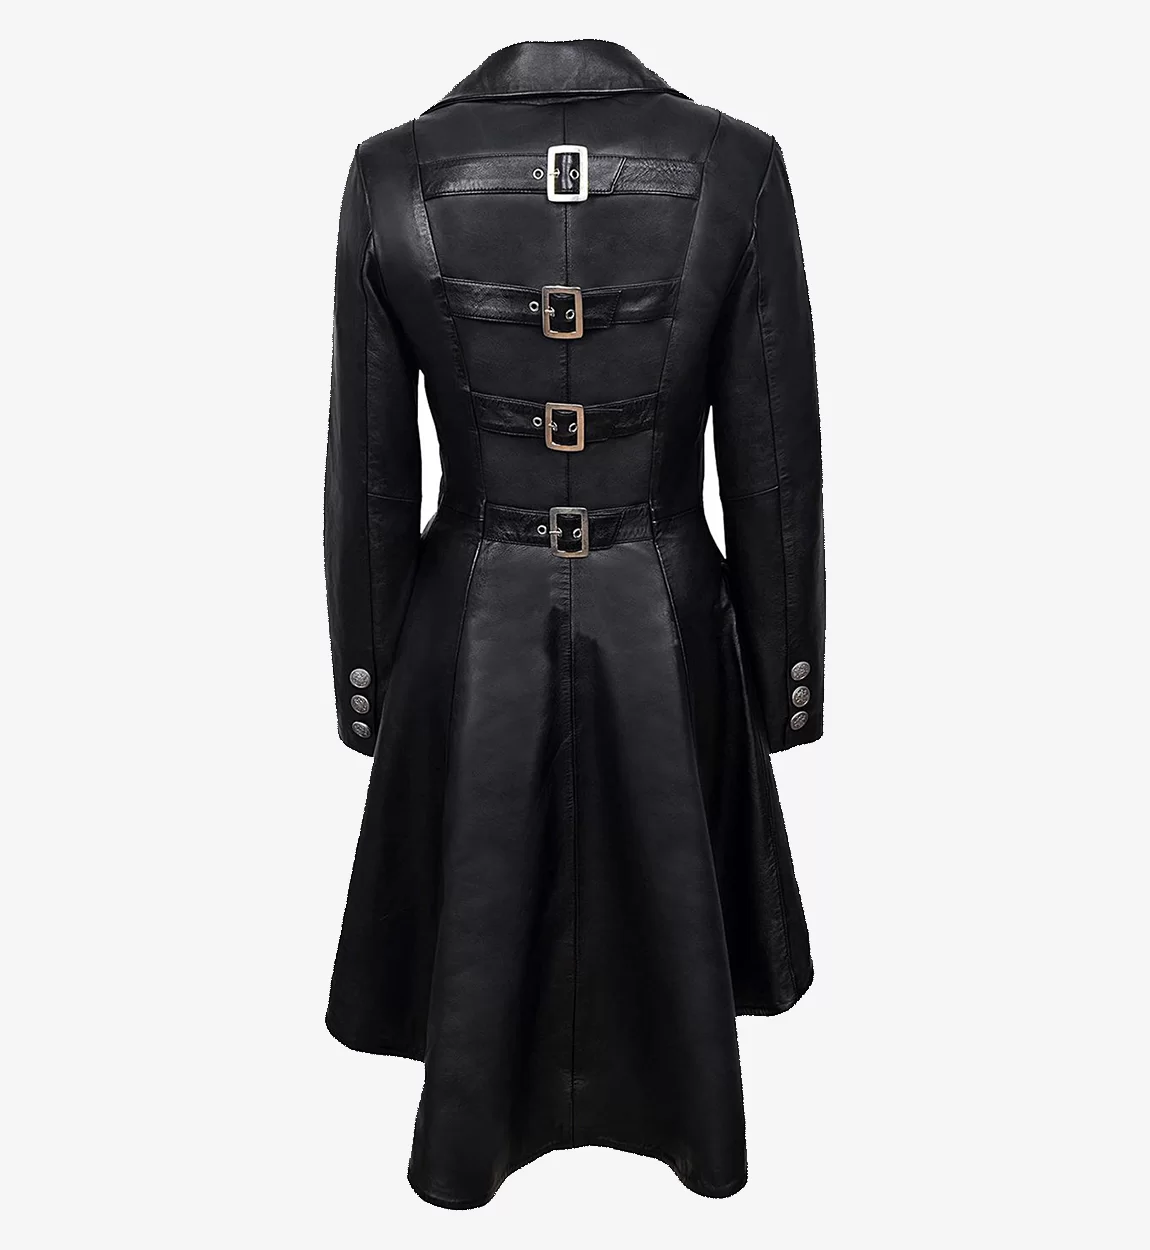 Womens-Gothic-Style-Back-Buckle-Real-Leather-Long-Coat1.webp